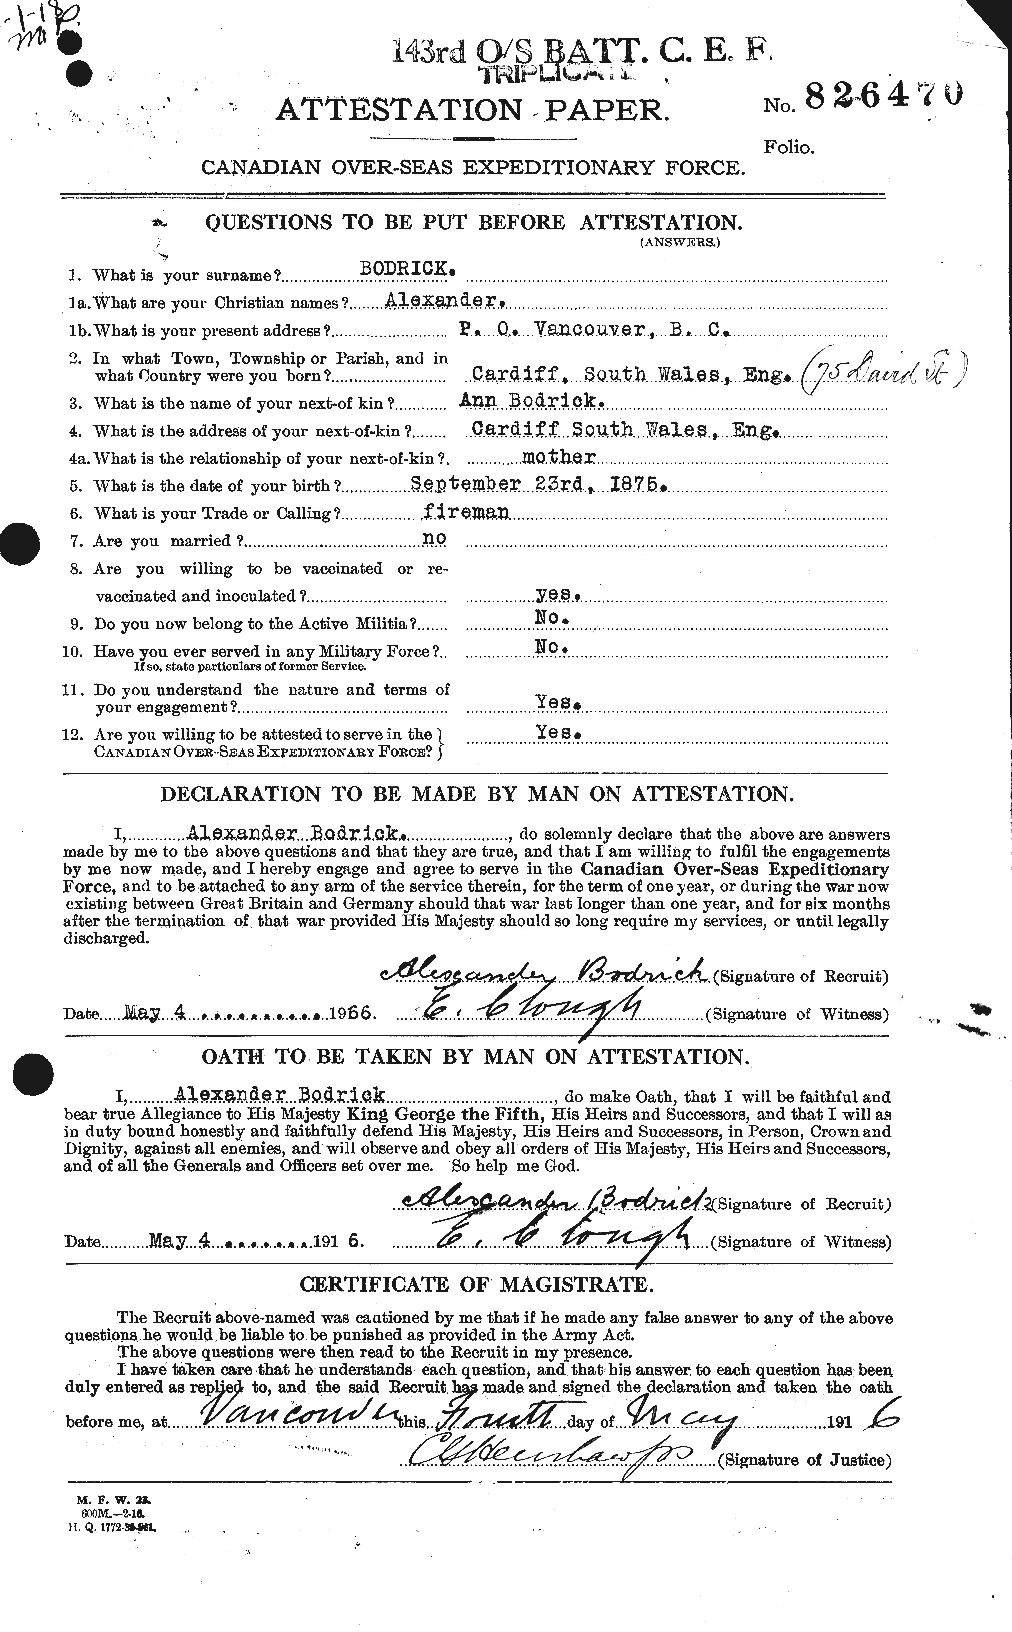 Personnel Records of the First World War - CEF 245122a